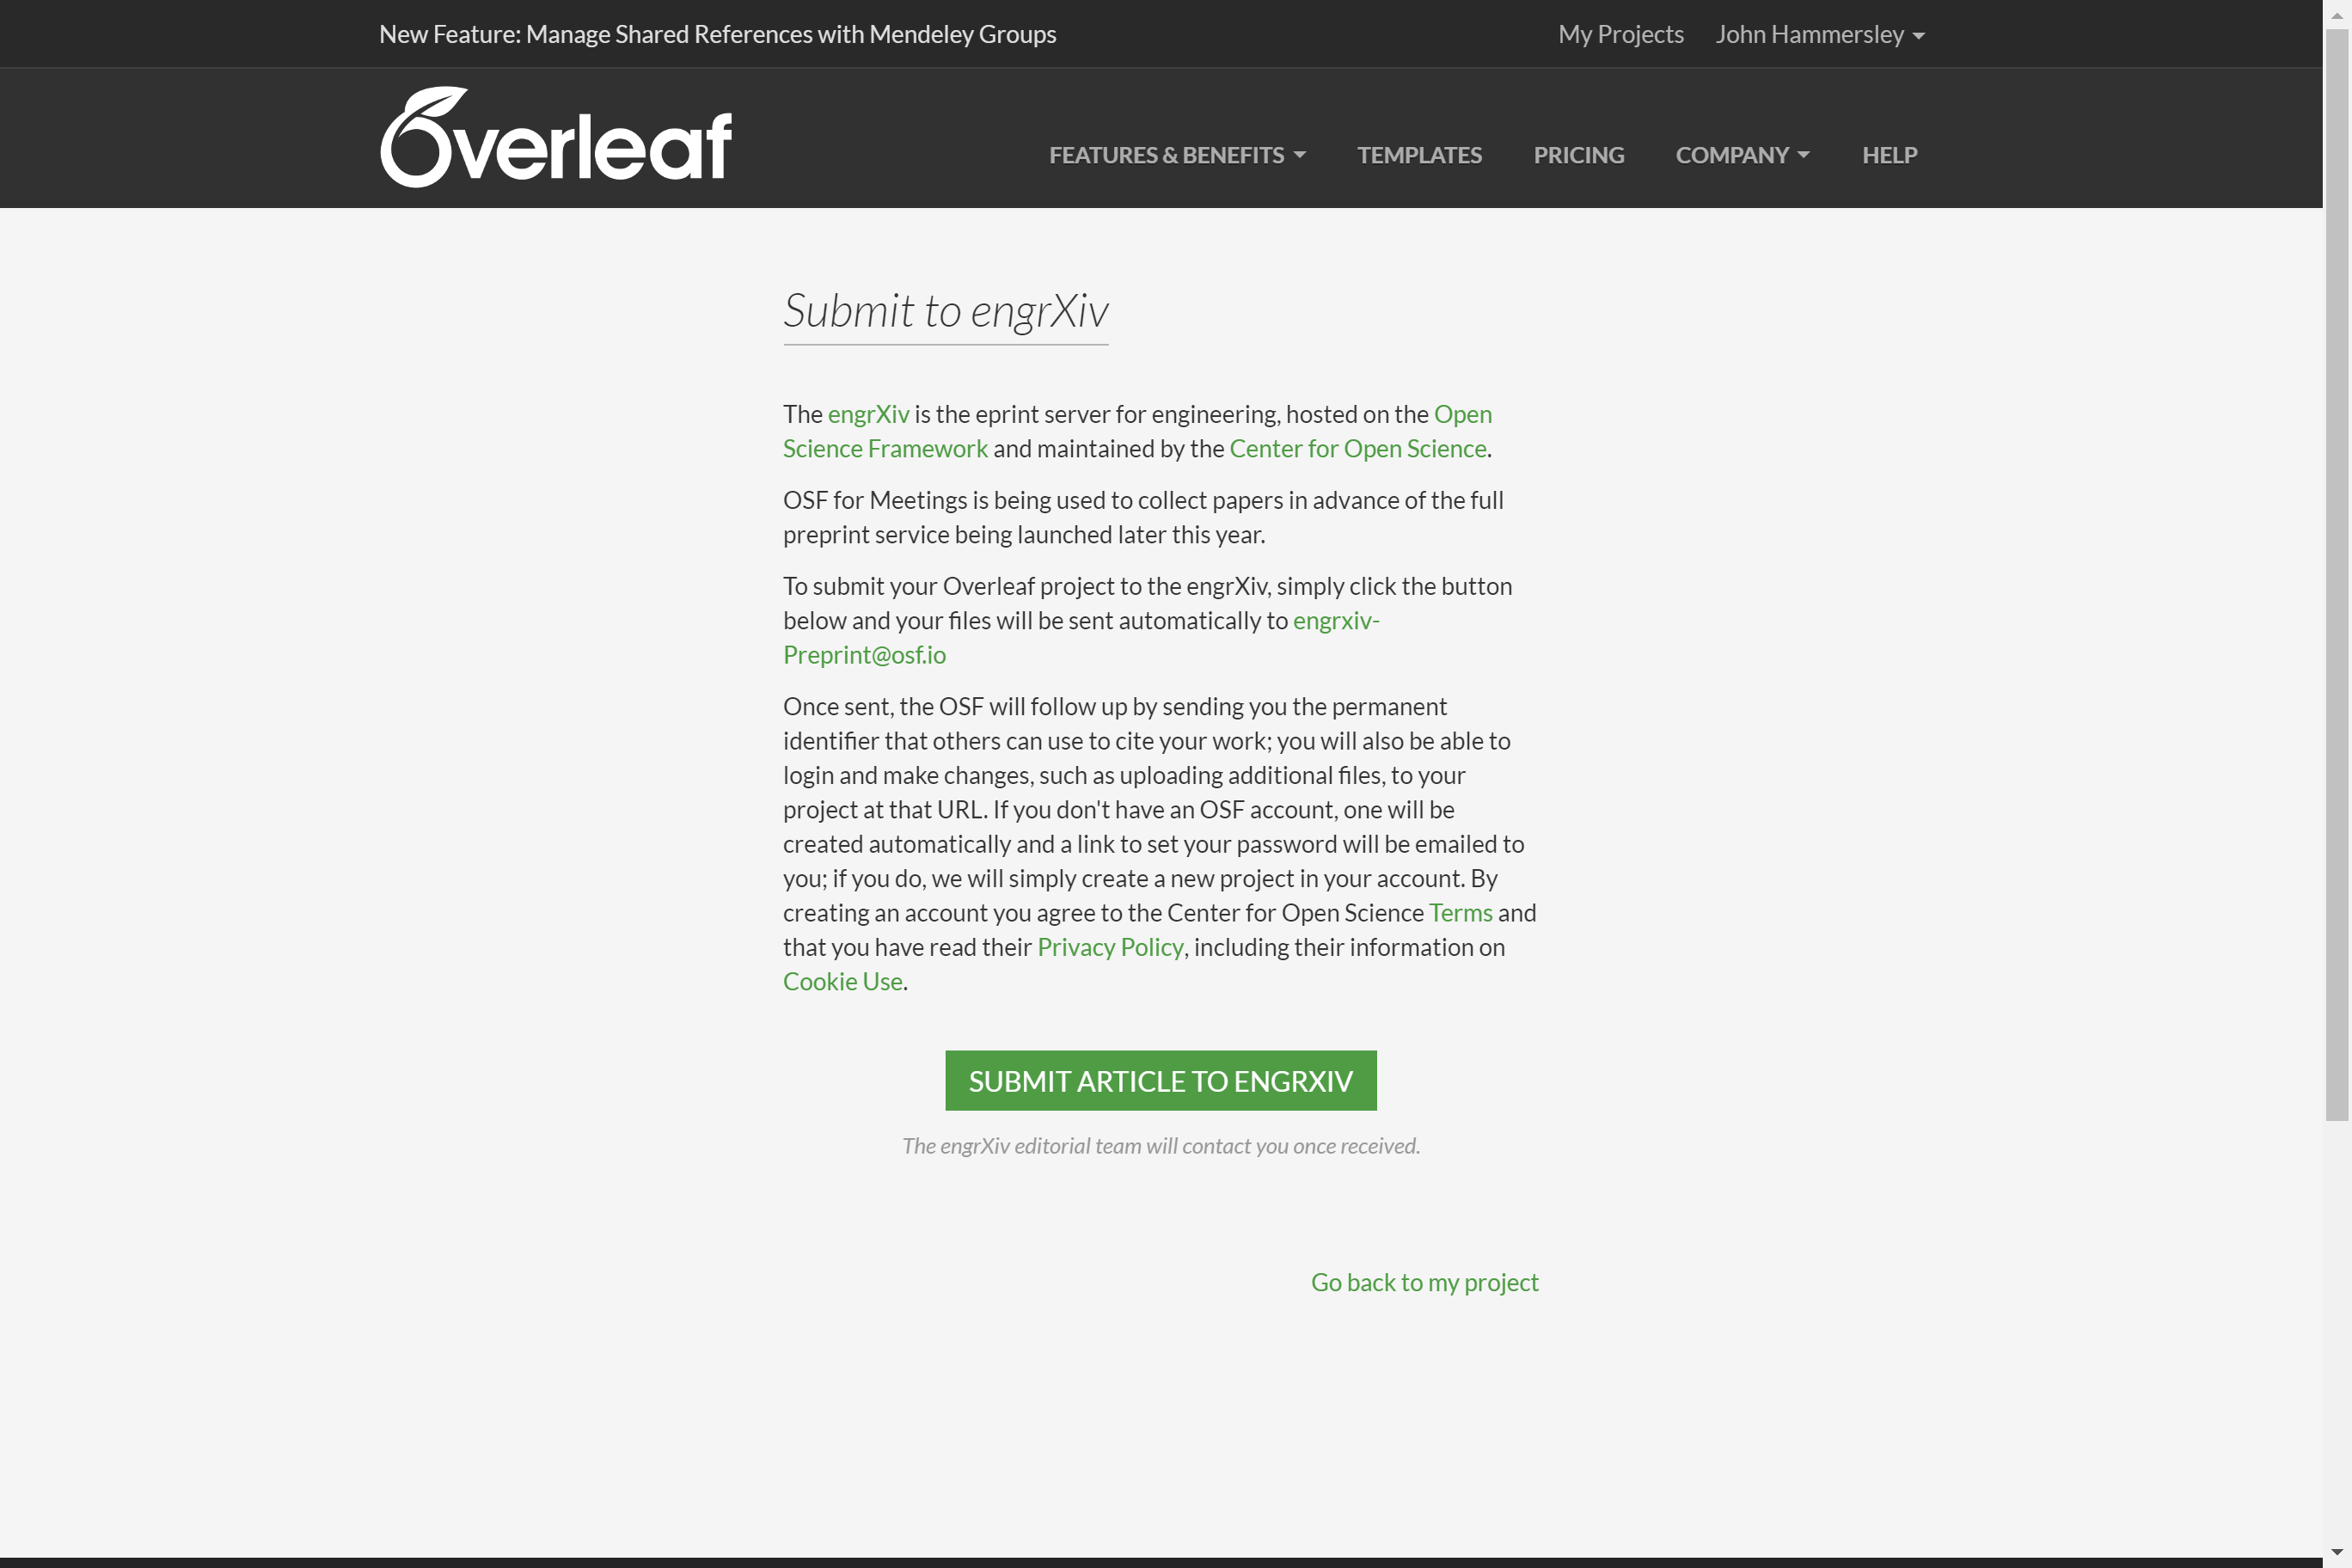 submit-to-engrxiv-on-overleaf